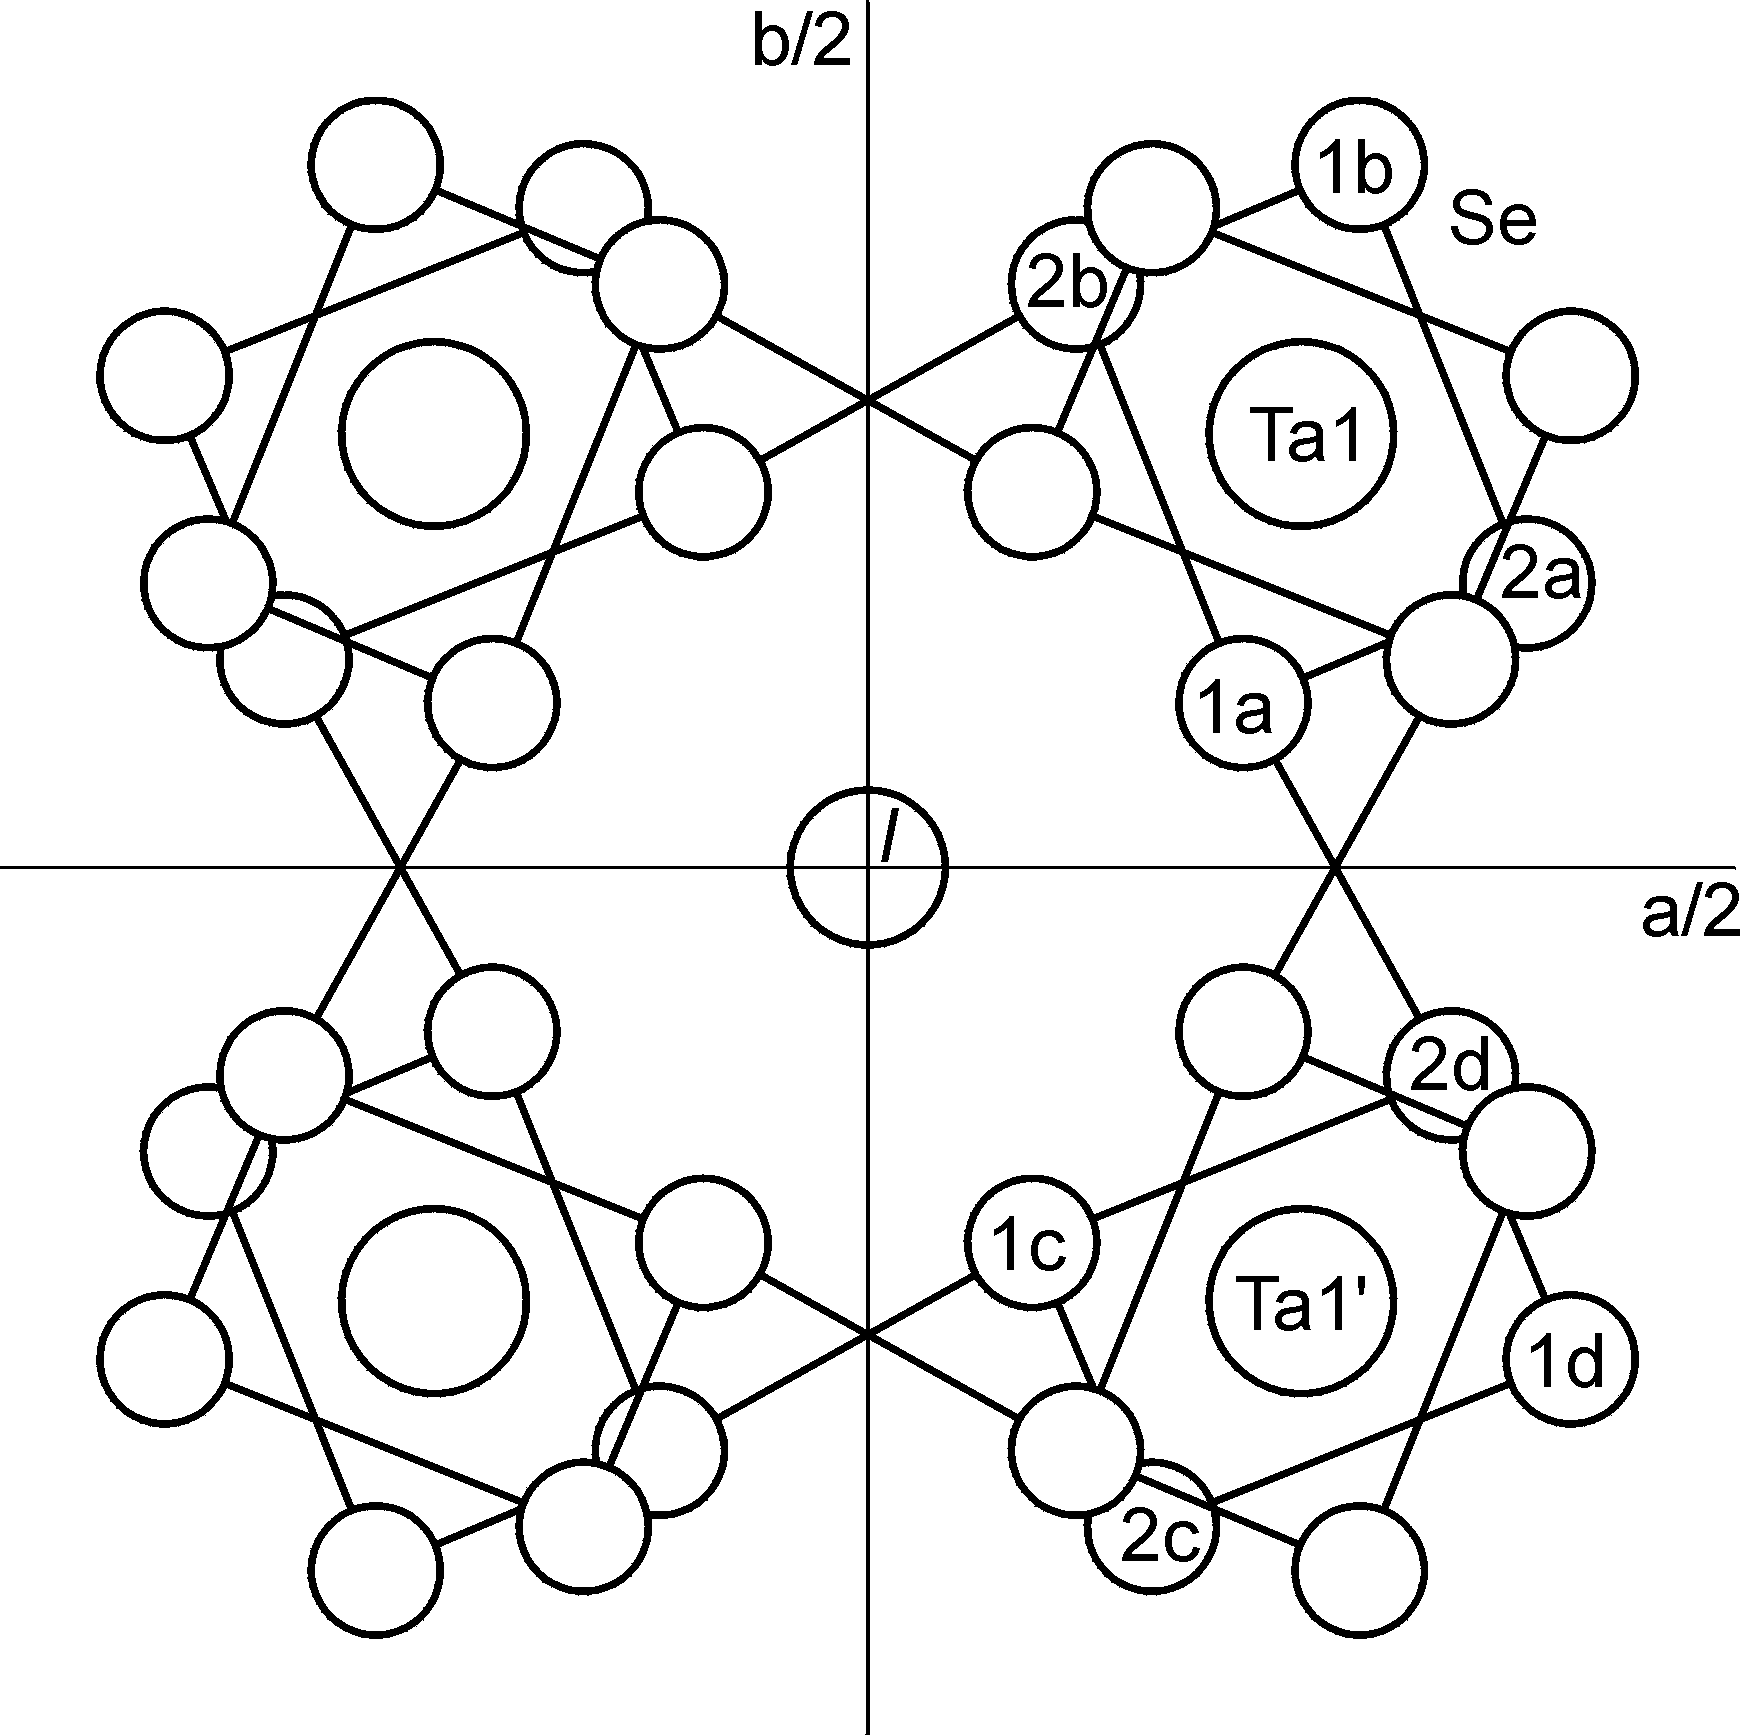 A figure of the projection of the basic structure of one unit cell onto the a, b- plane